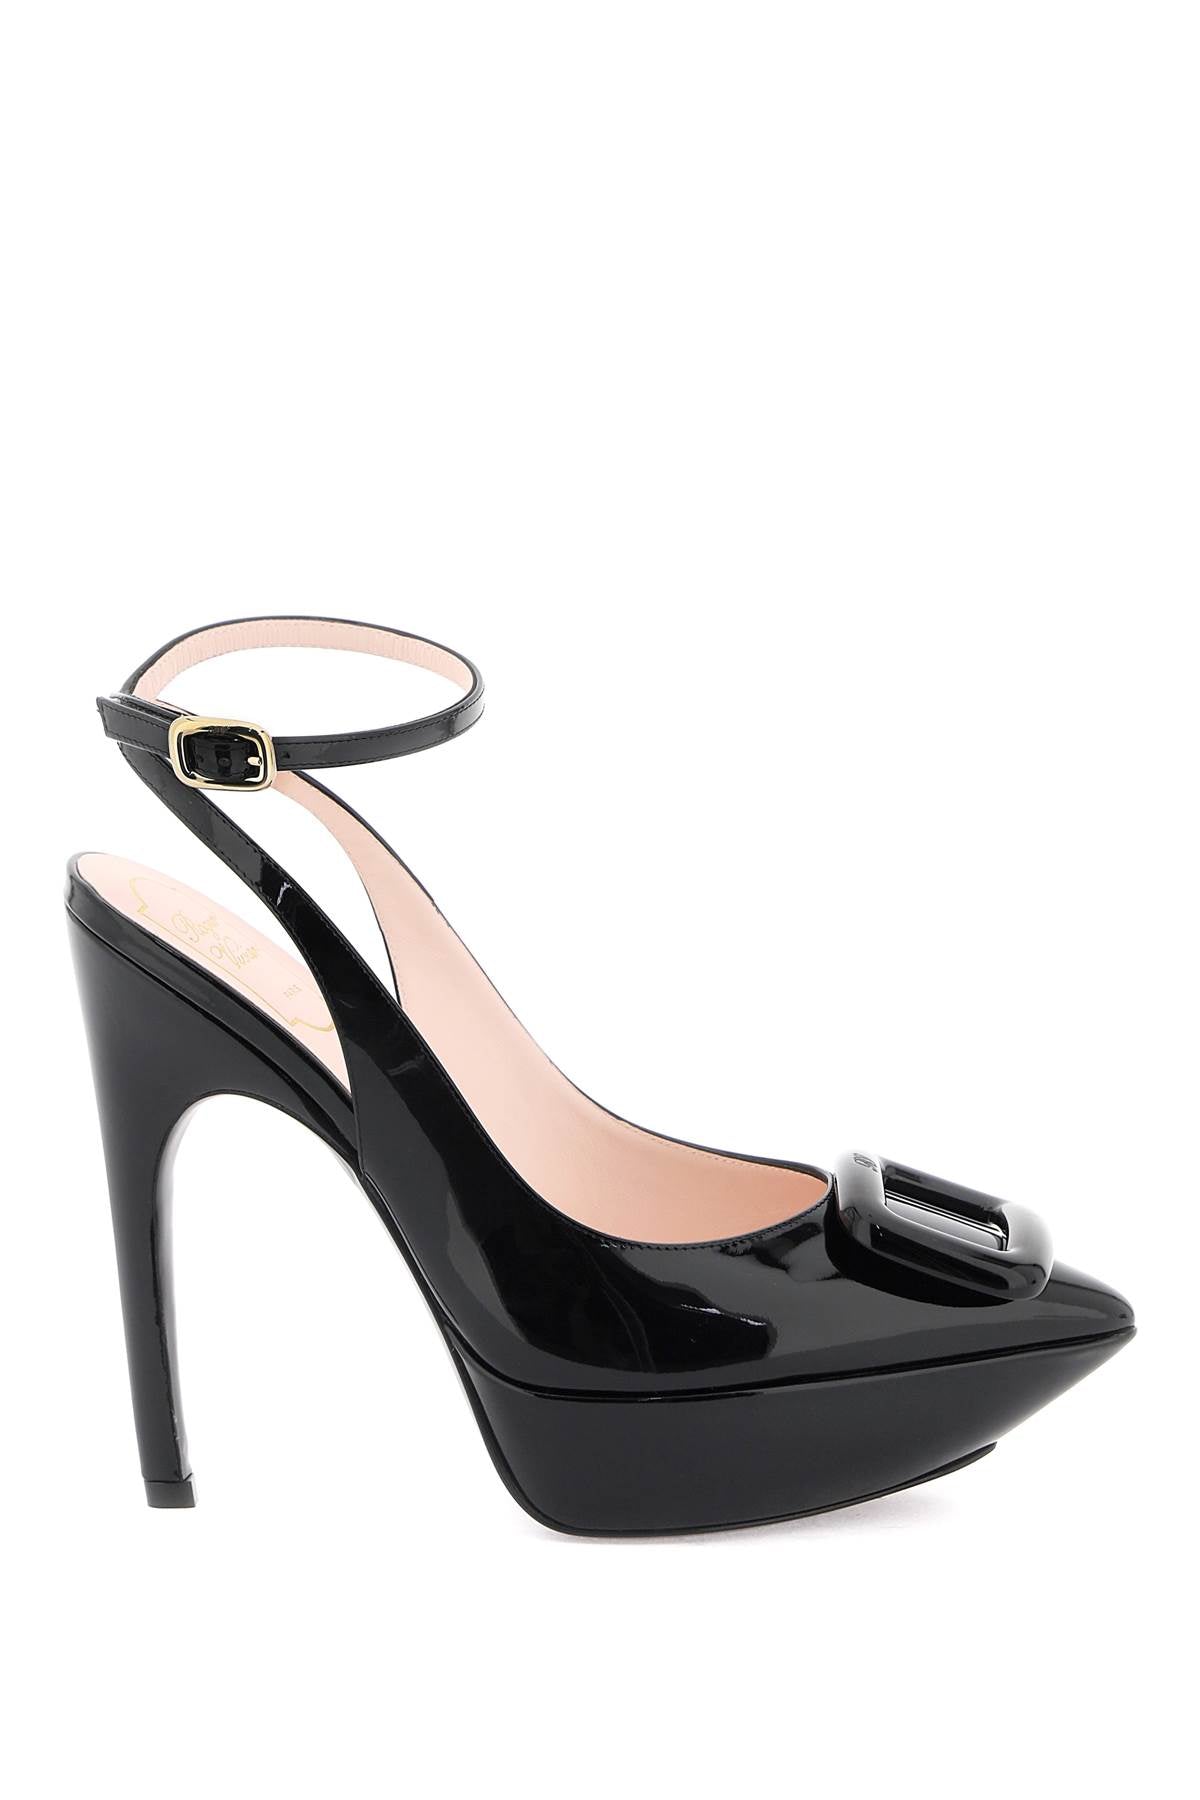 ROGER VIVIER Black Patent Leather Pointed Pumps with Adjustable Ankle Strap